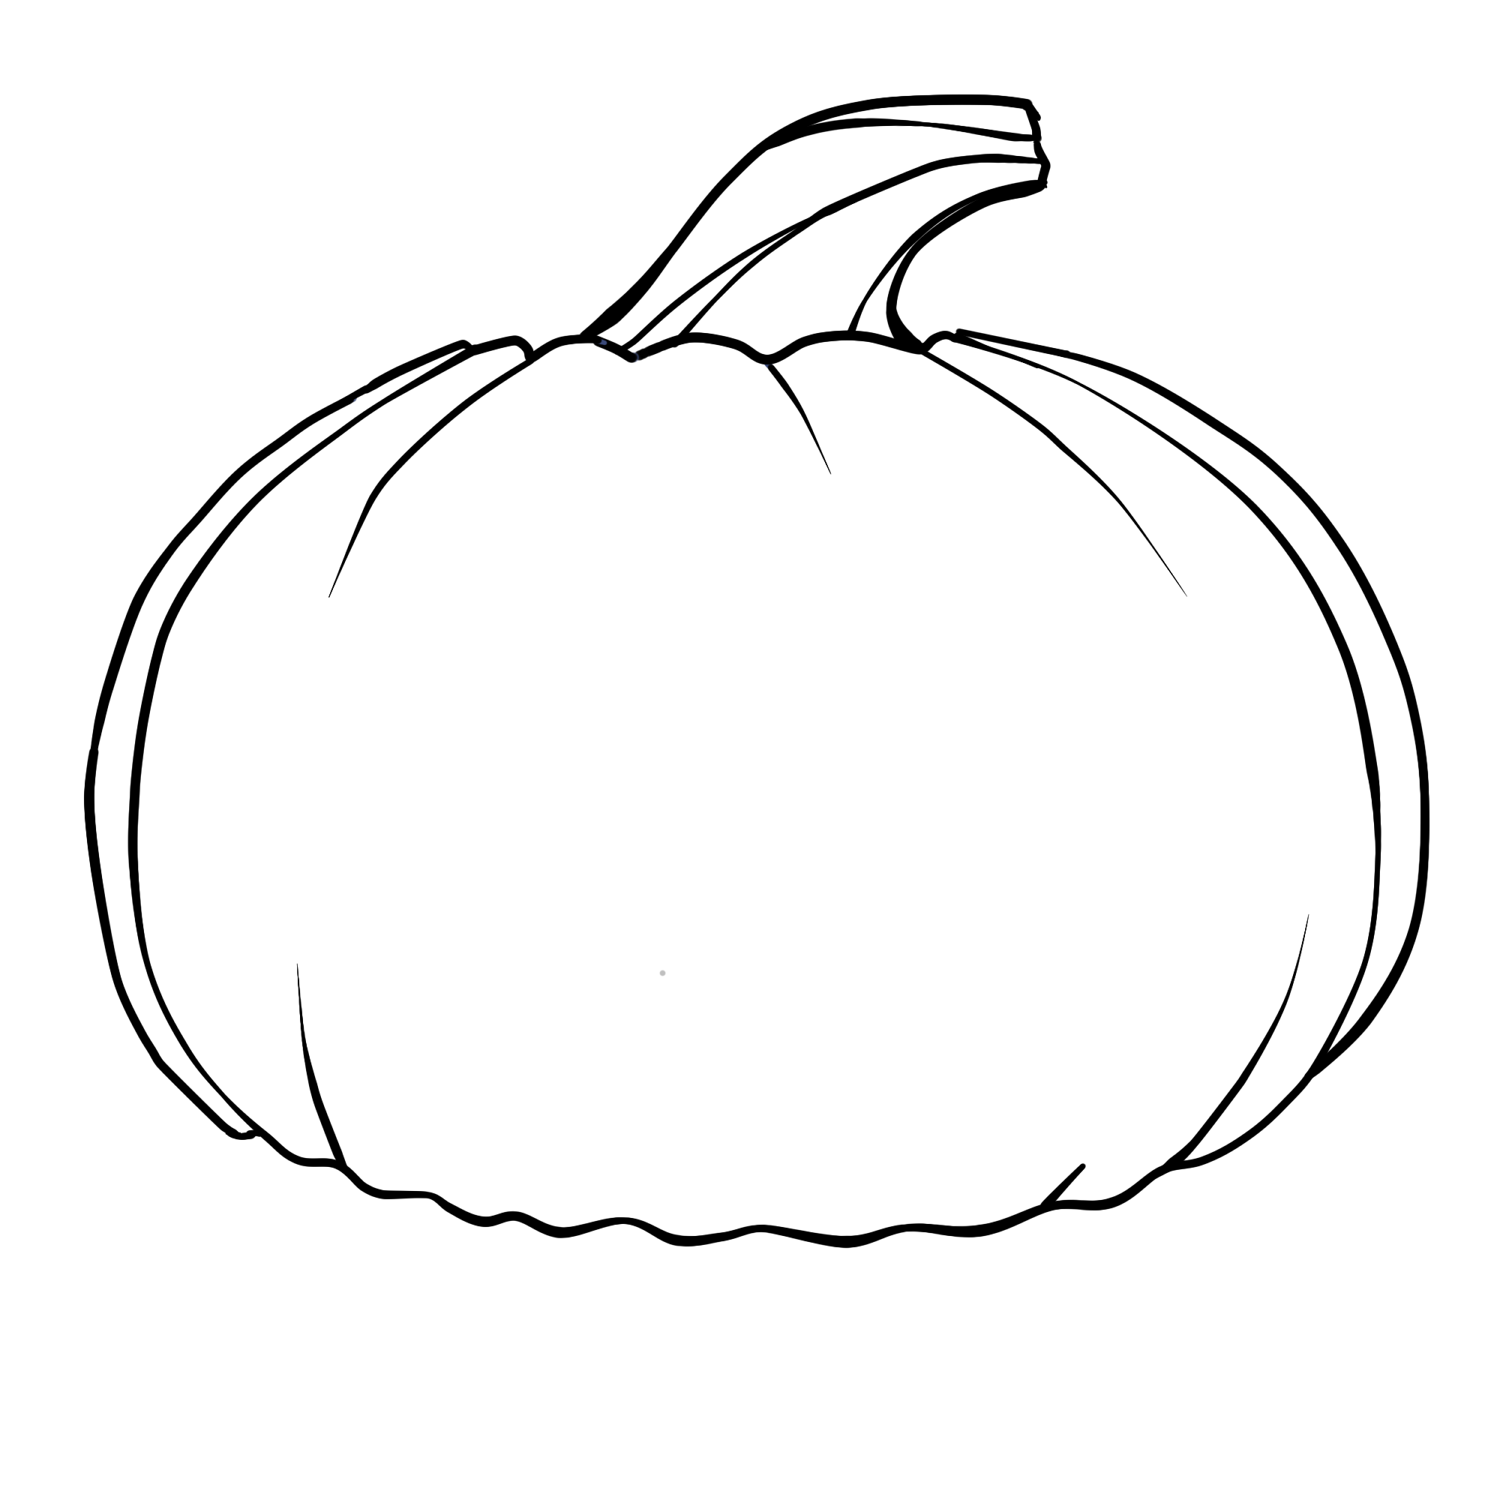 Free Outline Of A Pumpkin, Download Free Outline Of A Pumpkin png